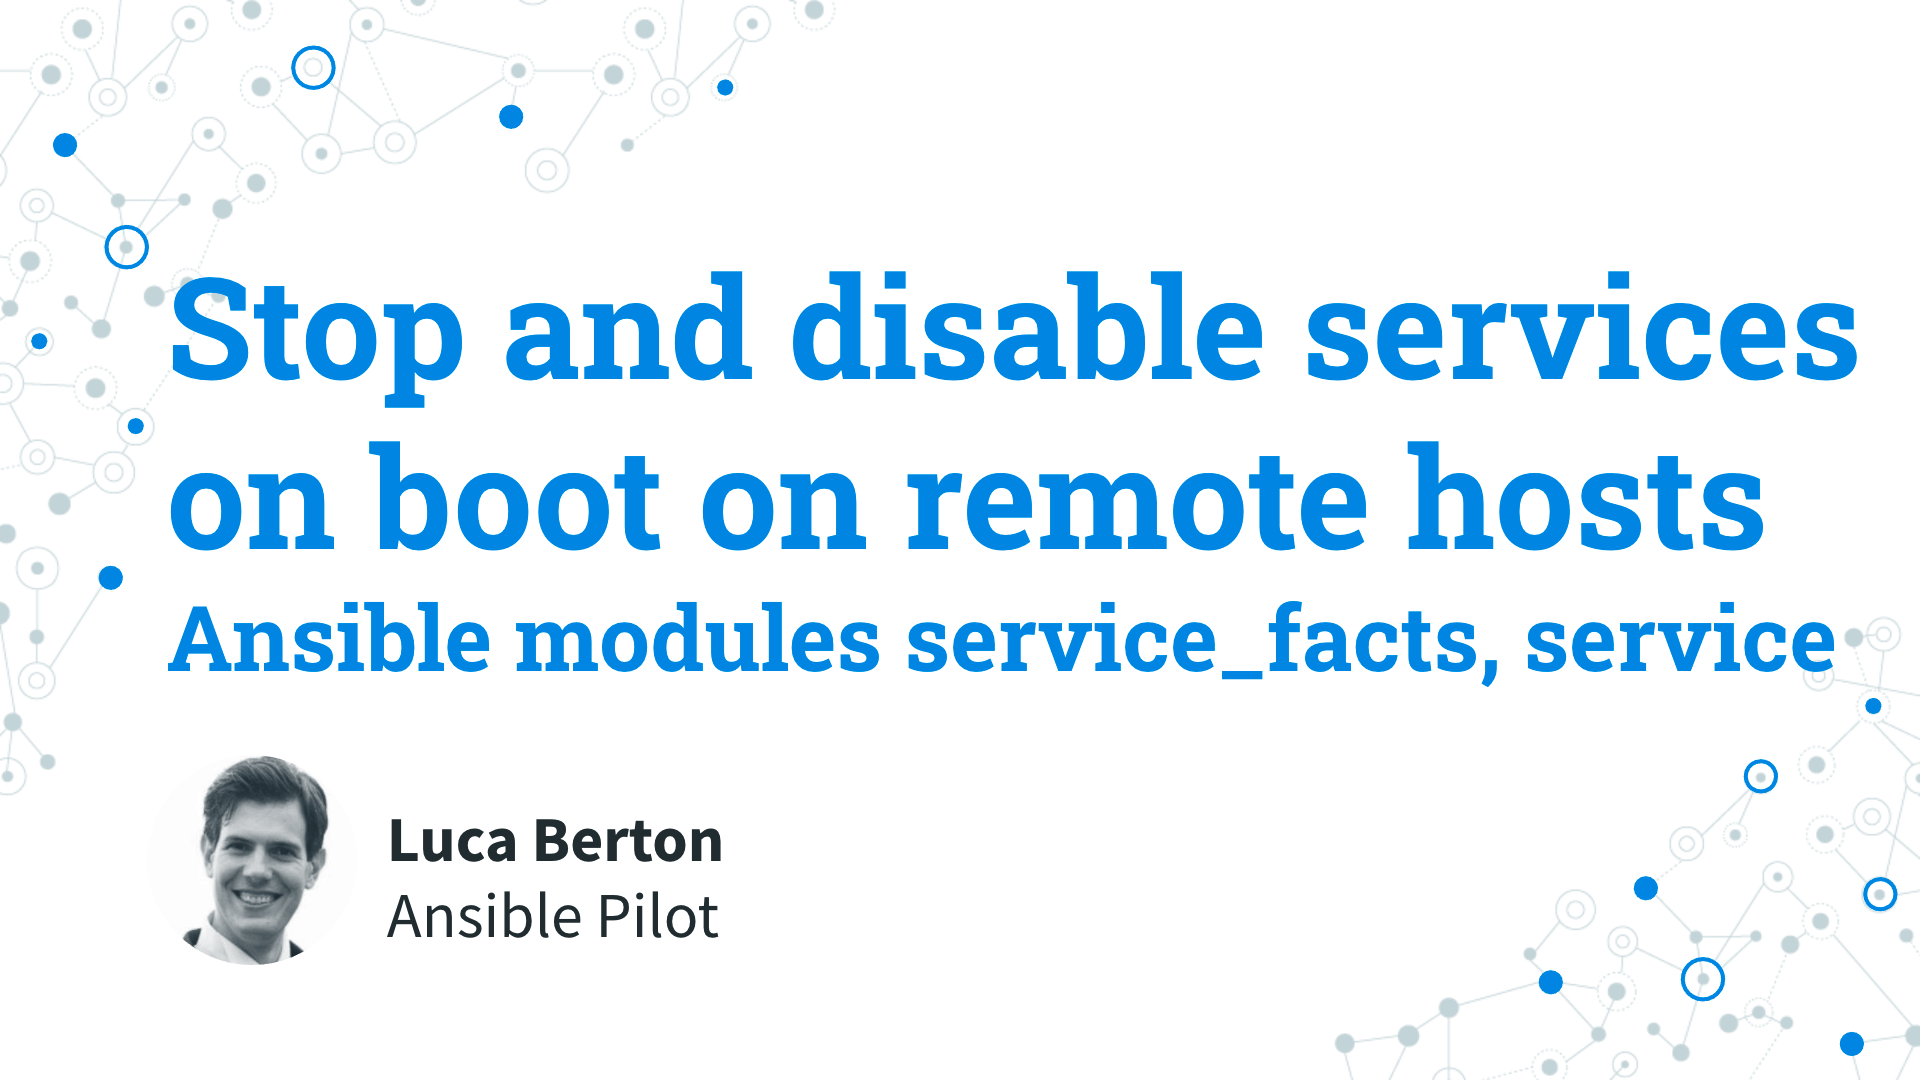 Stop and disable services on boot on remote hosts - Ansible module service_facts, service